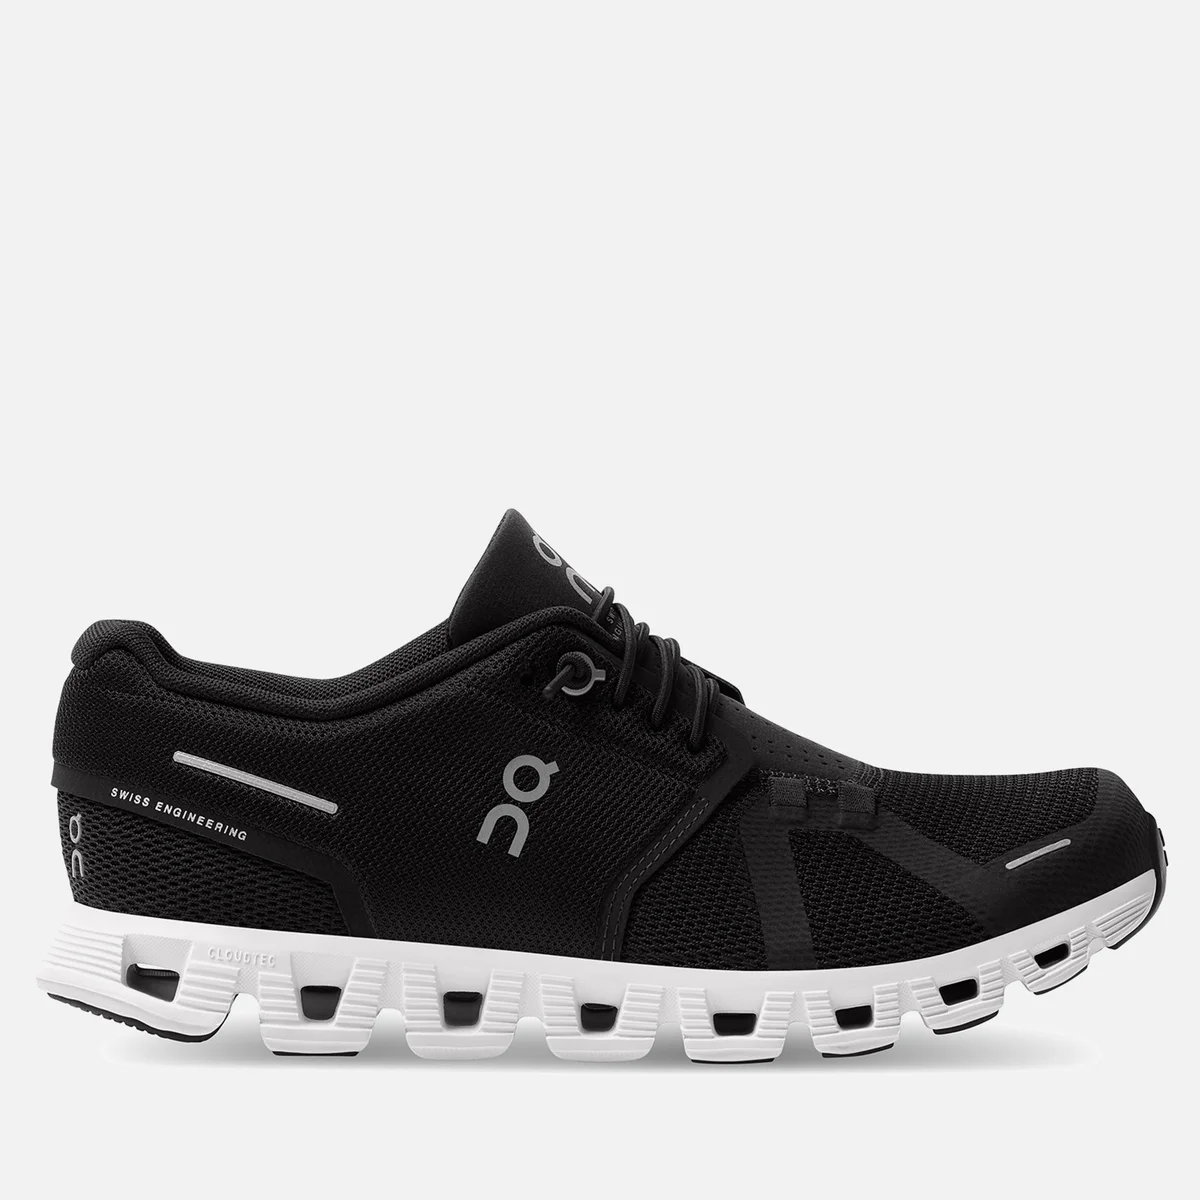 ON Women's Cloud 5 Running Trainers - Black/White Image 1